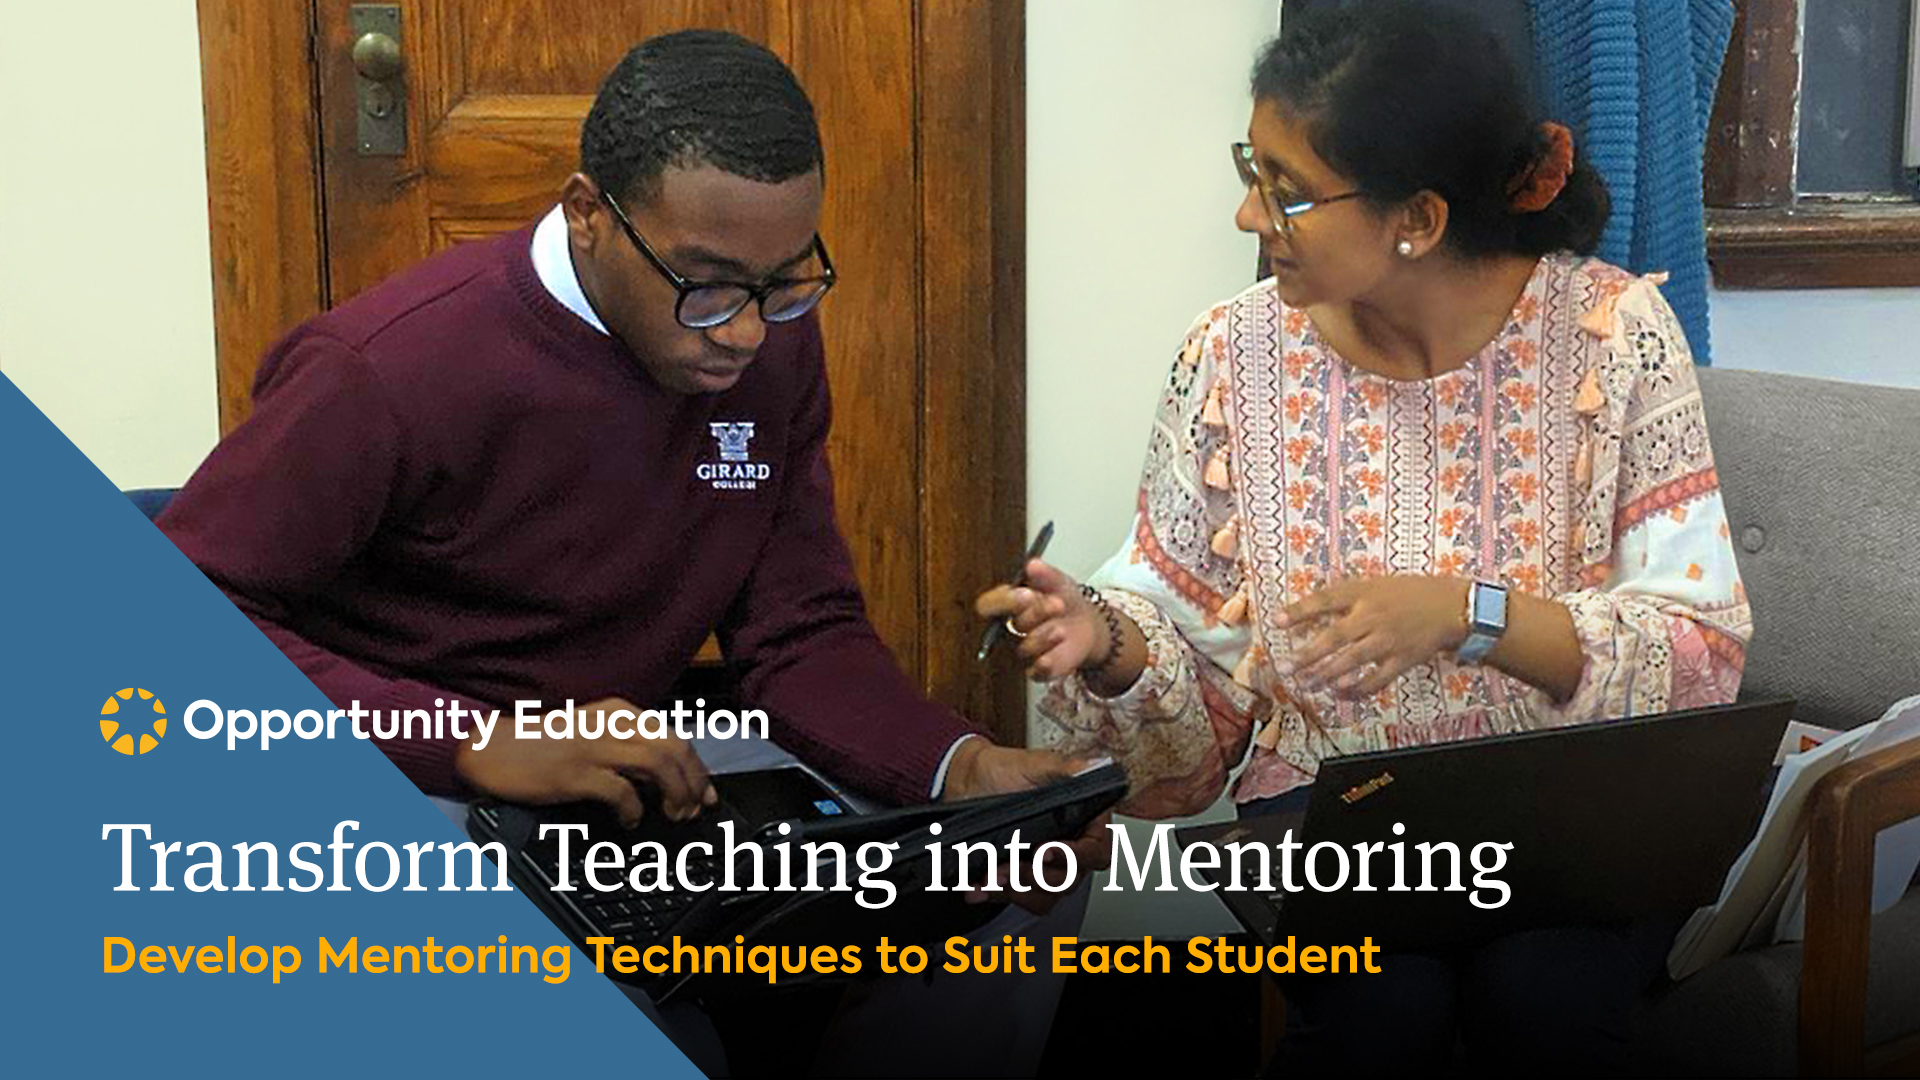 Join Opportunity Education to learn how to transform teaching into mentoring at your high school.